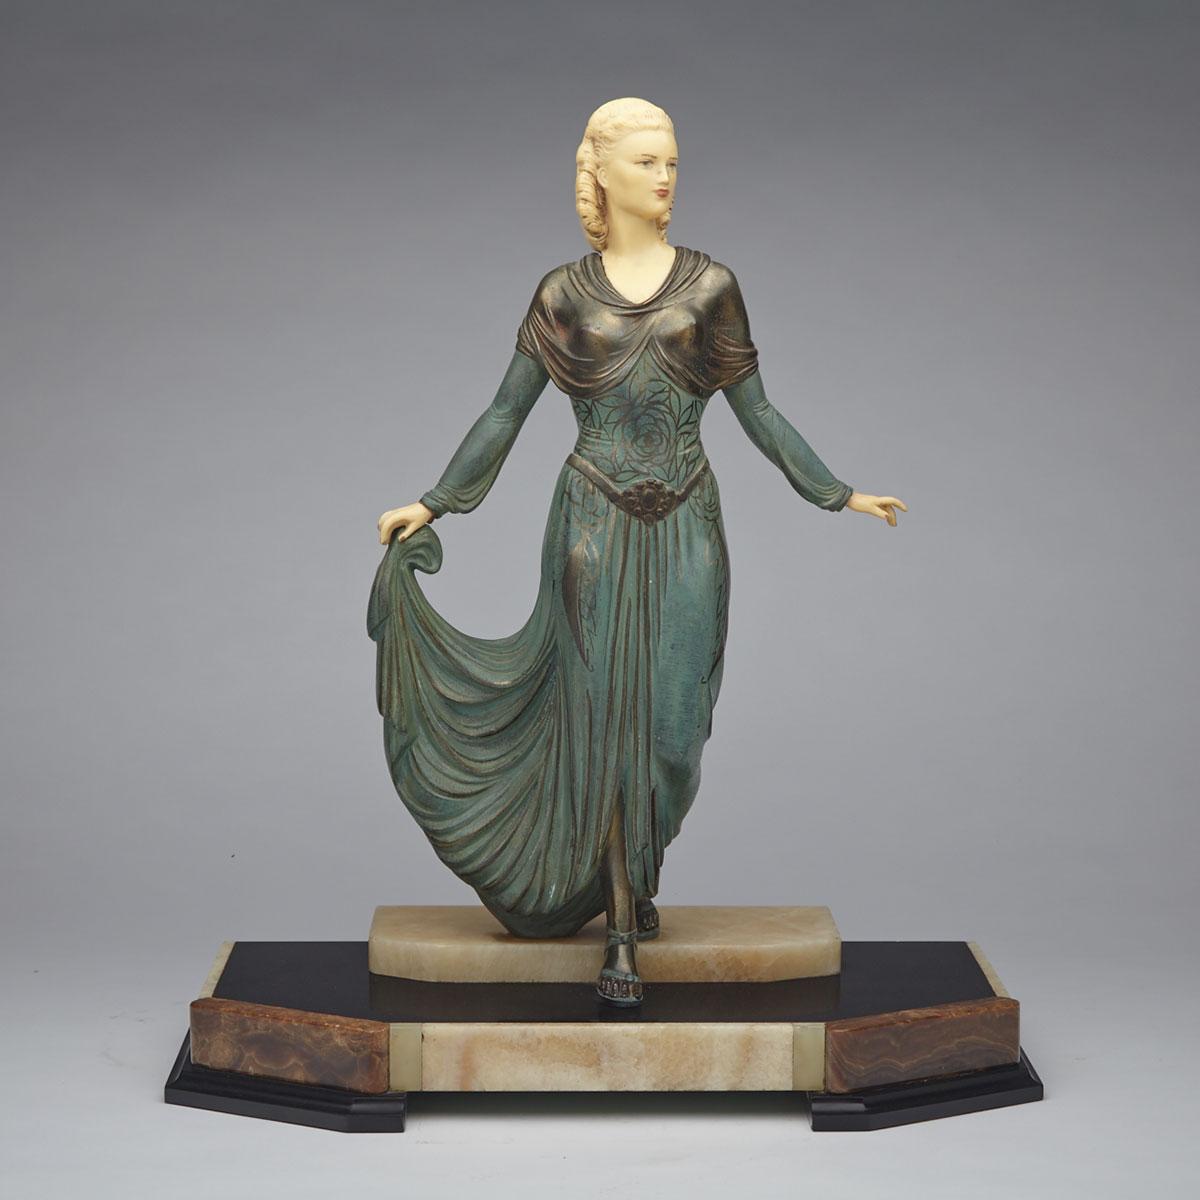 French Art Deco White Metal, Ivorine and Onyx Model of a Young Woman, c.1930